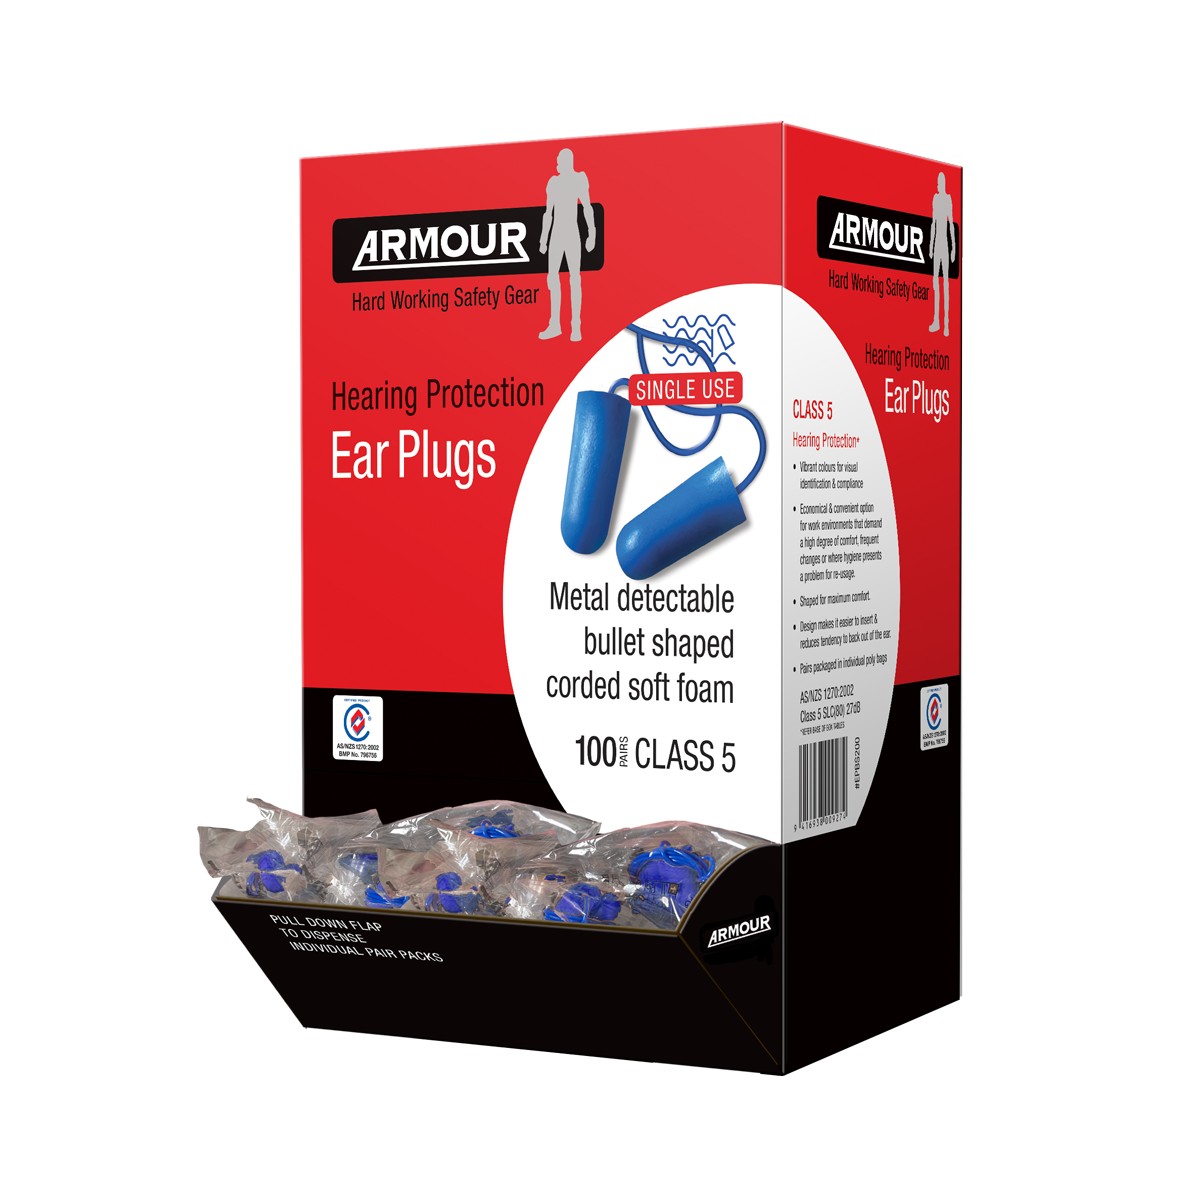 Armour Safety Products Ltd. - Armour Bullet Ear Plug Metal Detectable Corded – Class 5